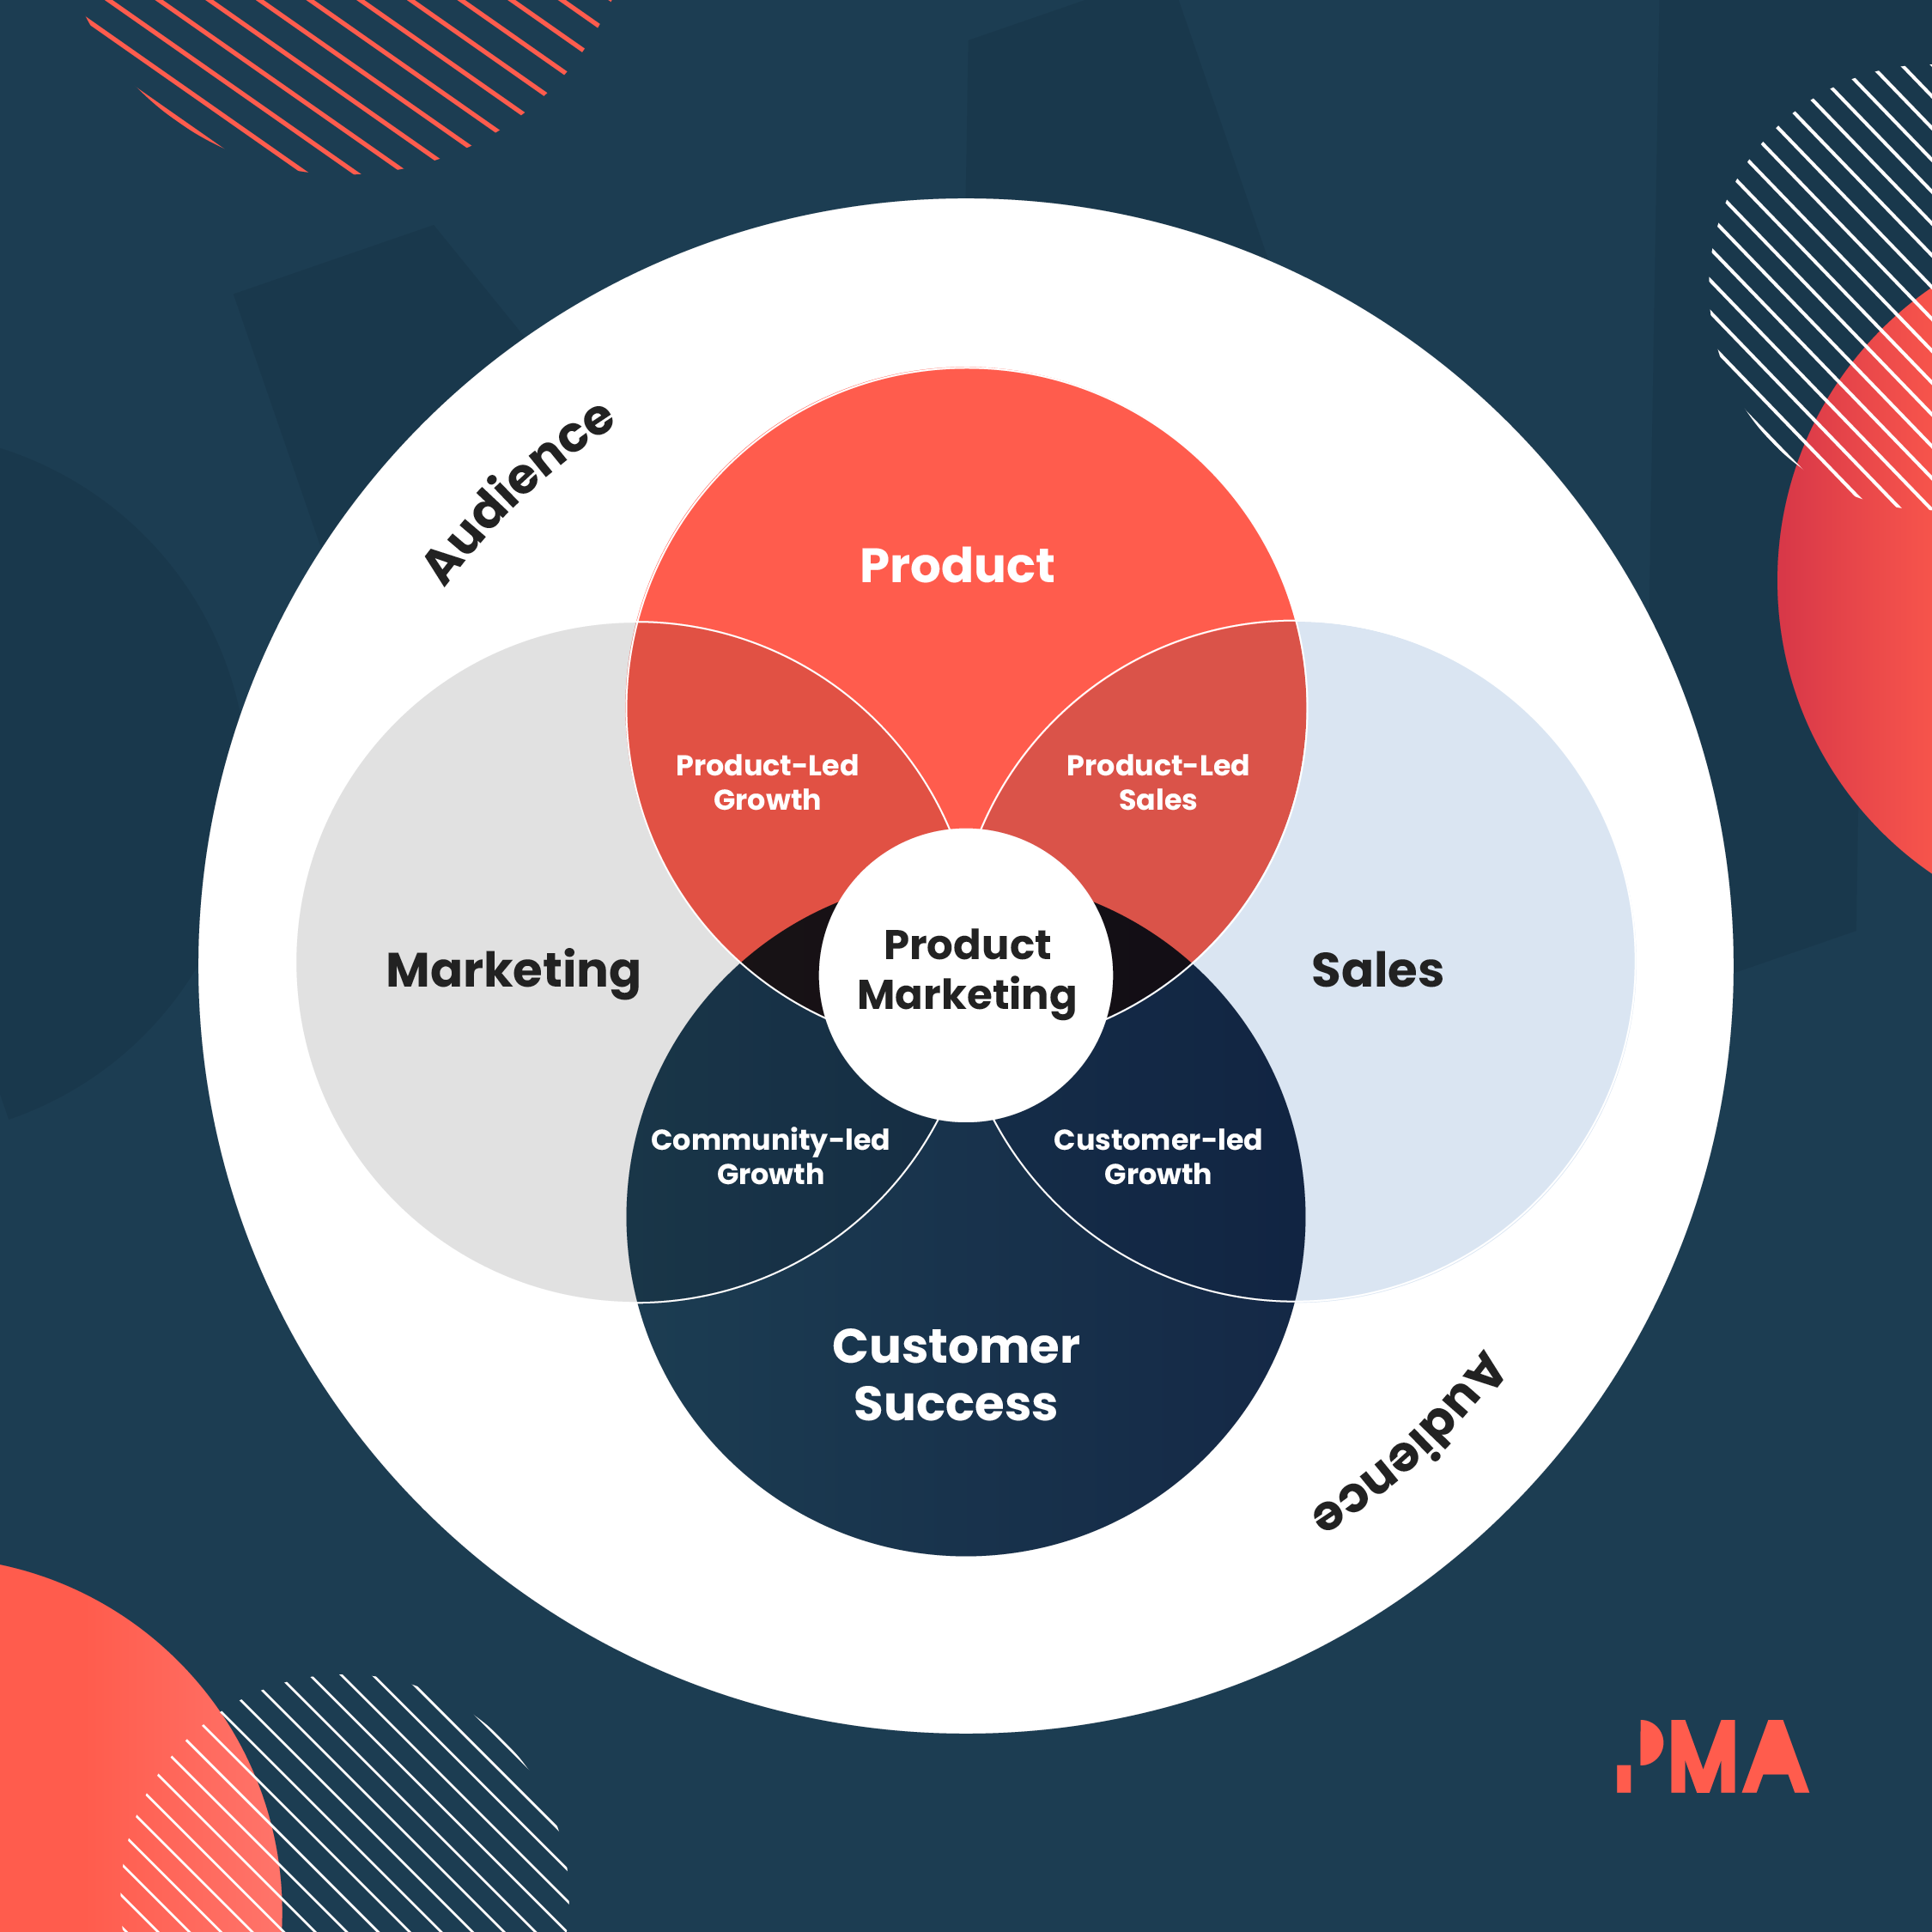 Product Marketing Alliance explains what product marketing is in 8 simple areas